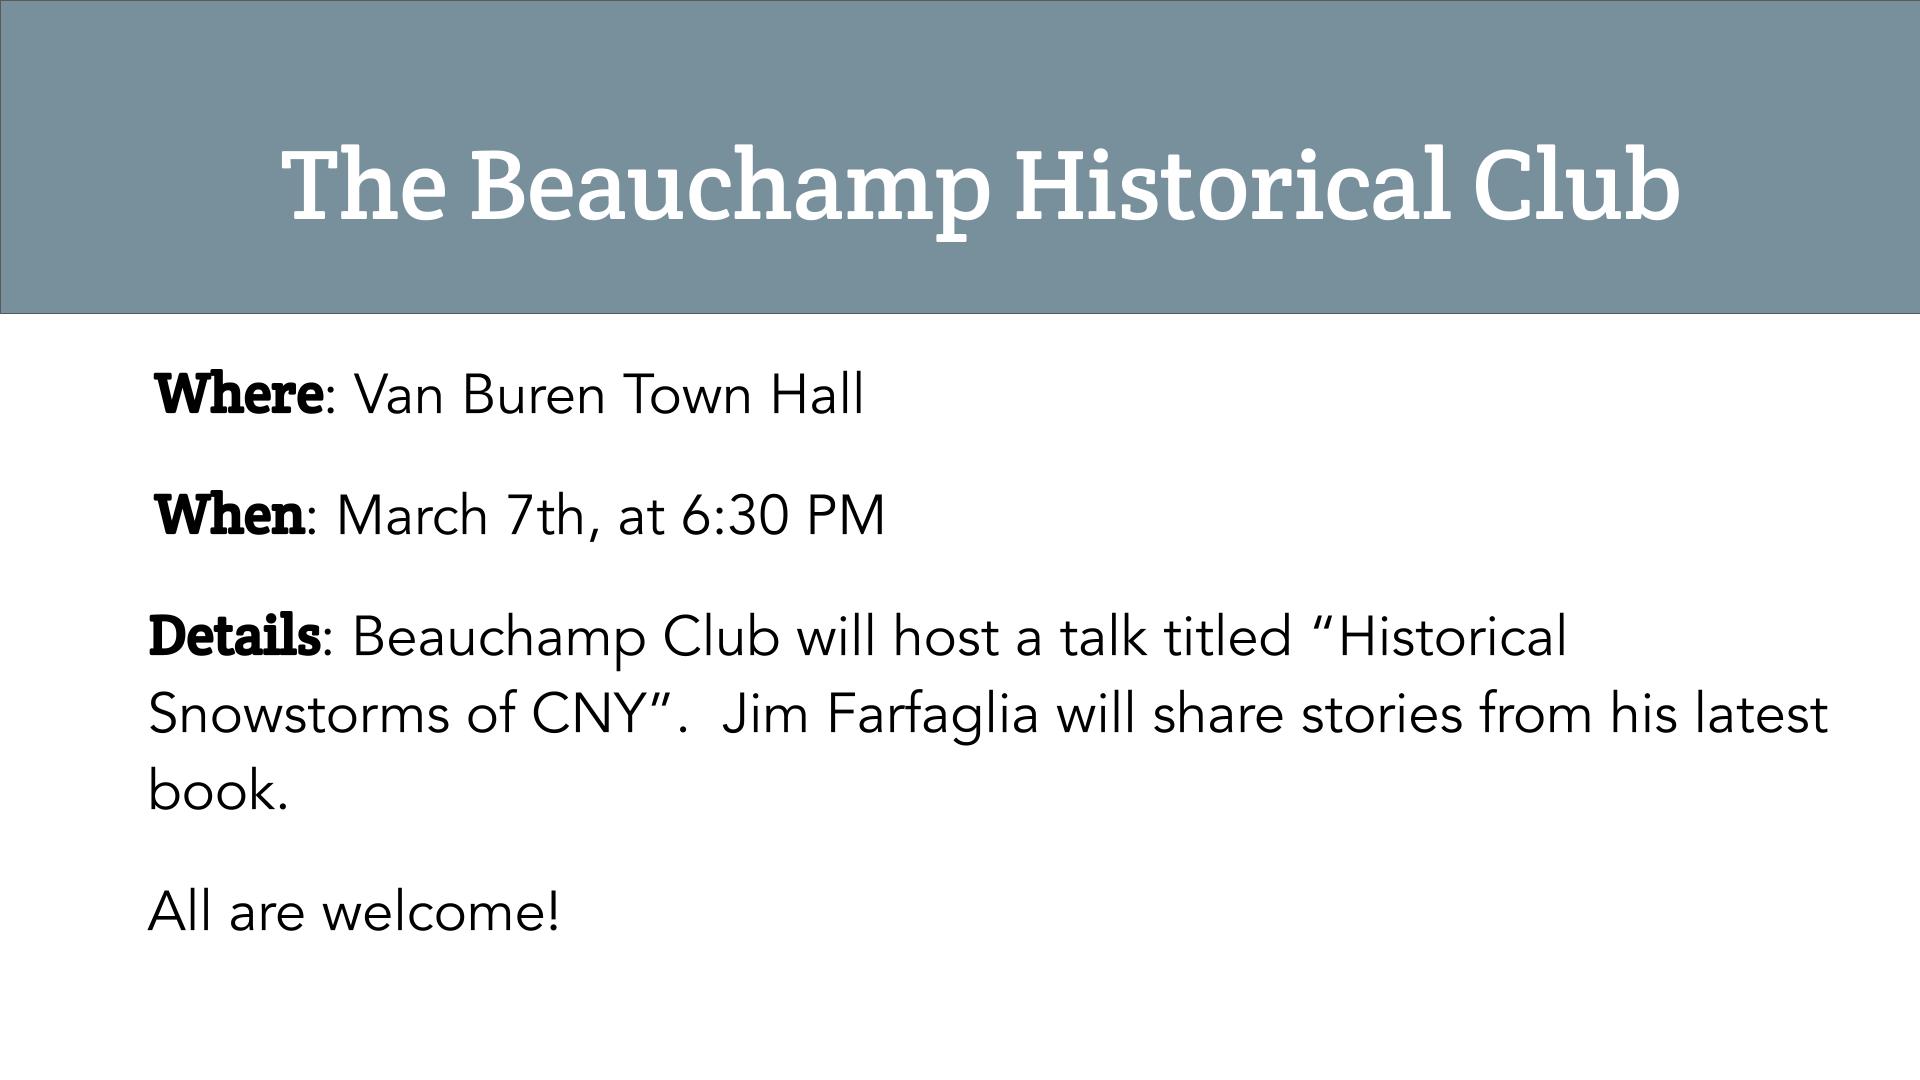 Beauchamp Historical Club Historical Snowstorms of CNY